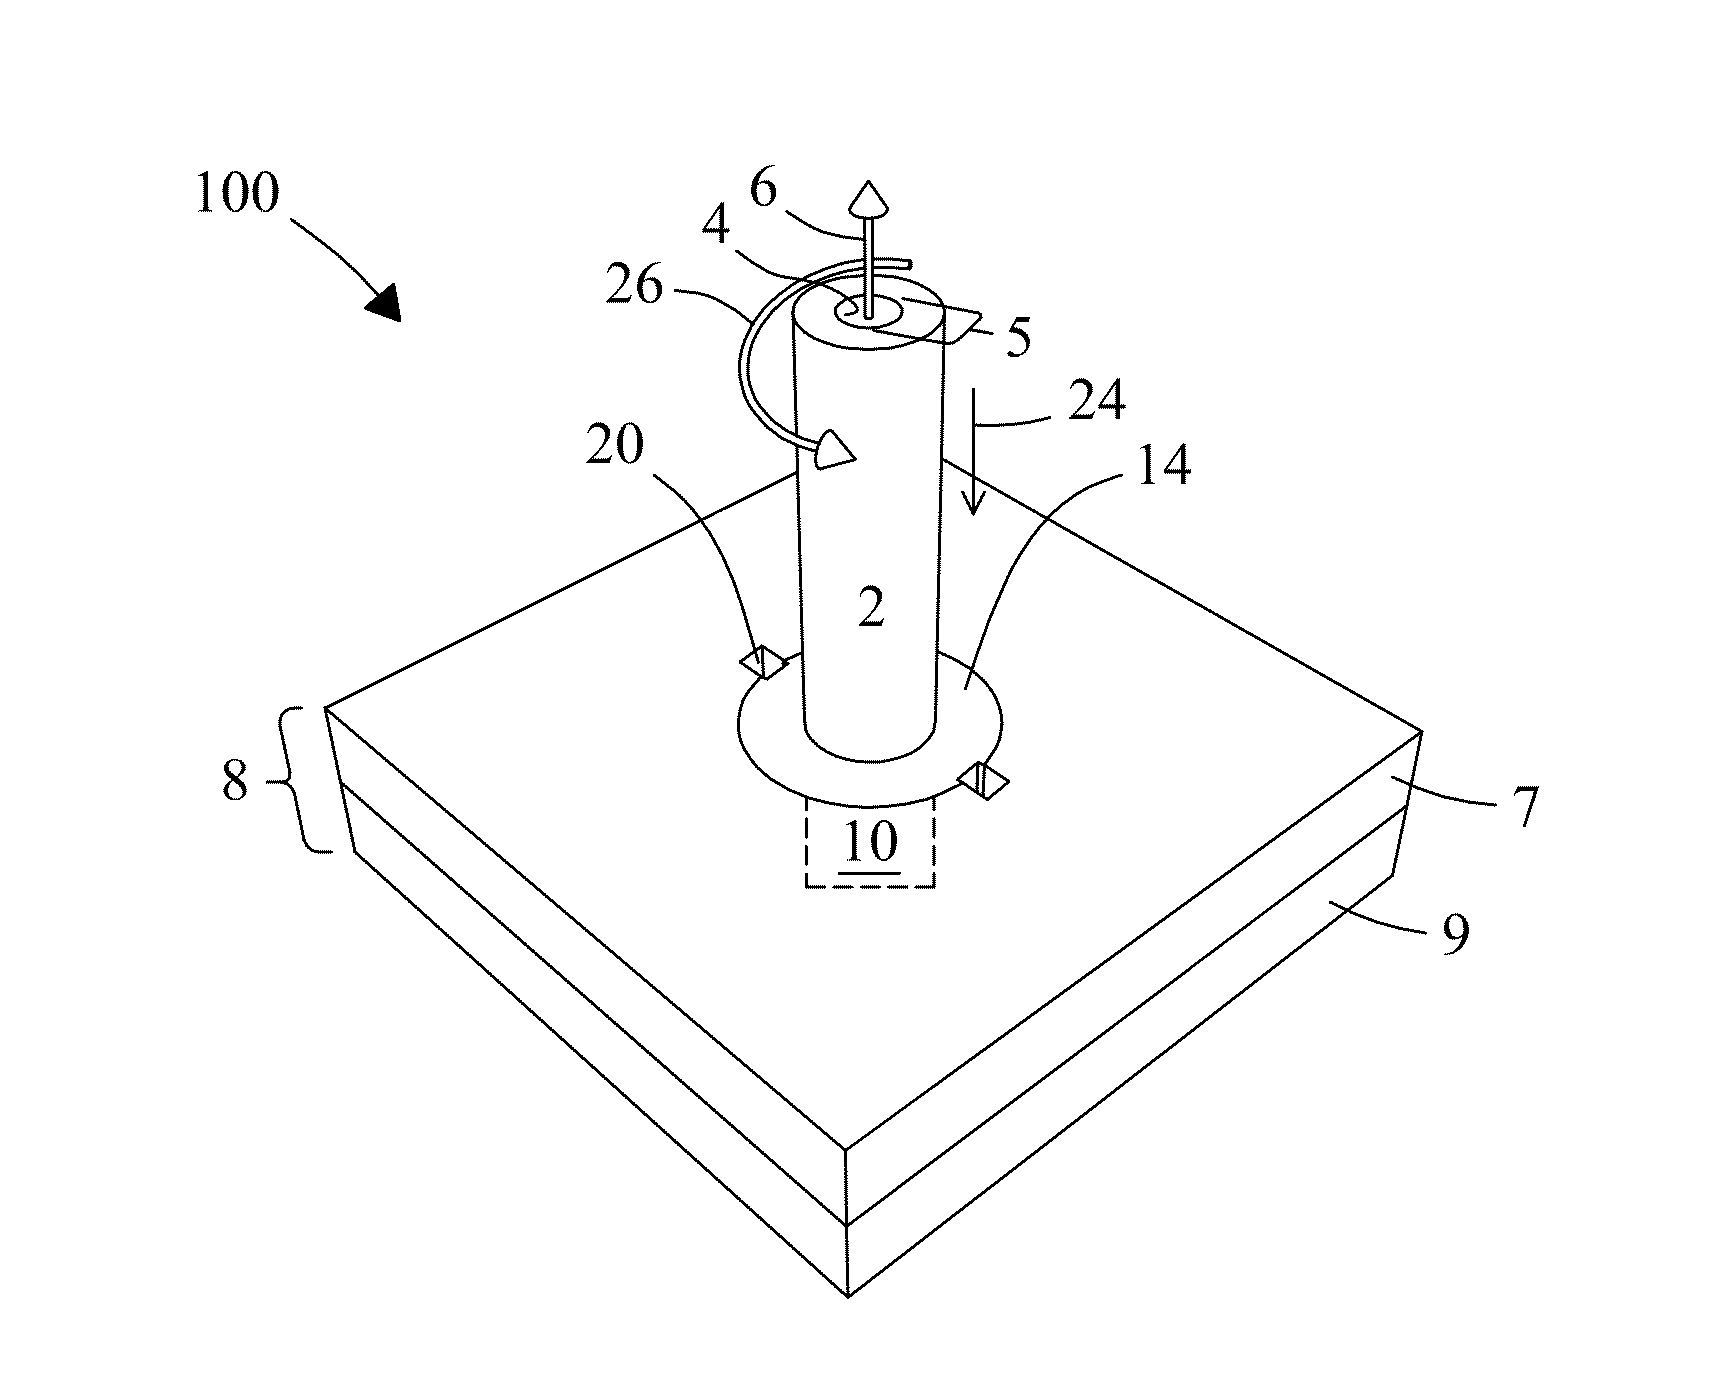 System and process for formation of extrusion structures